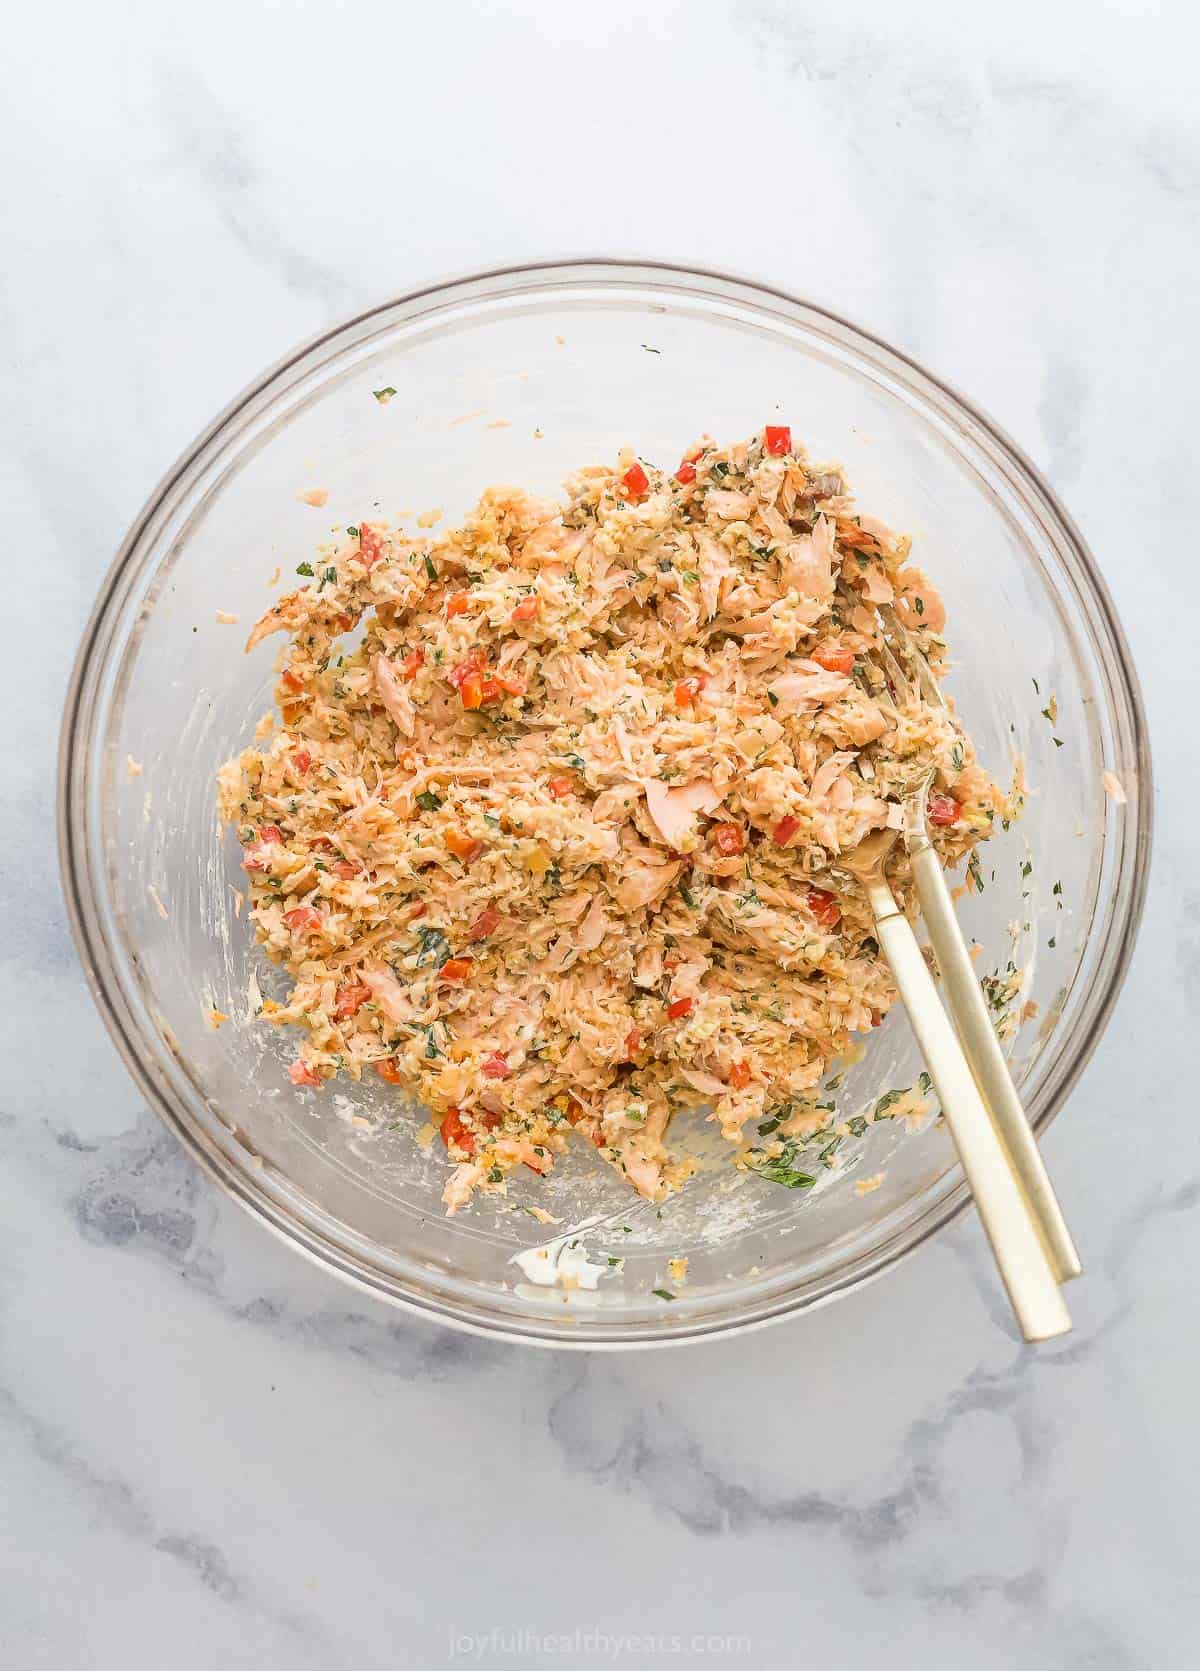 Salmon patty mixture in a bowl.